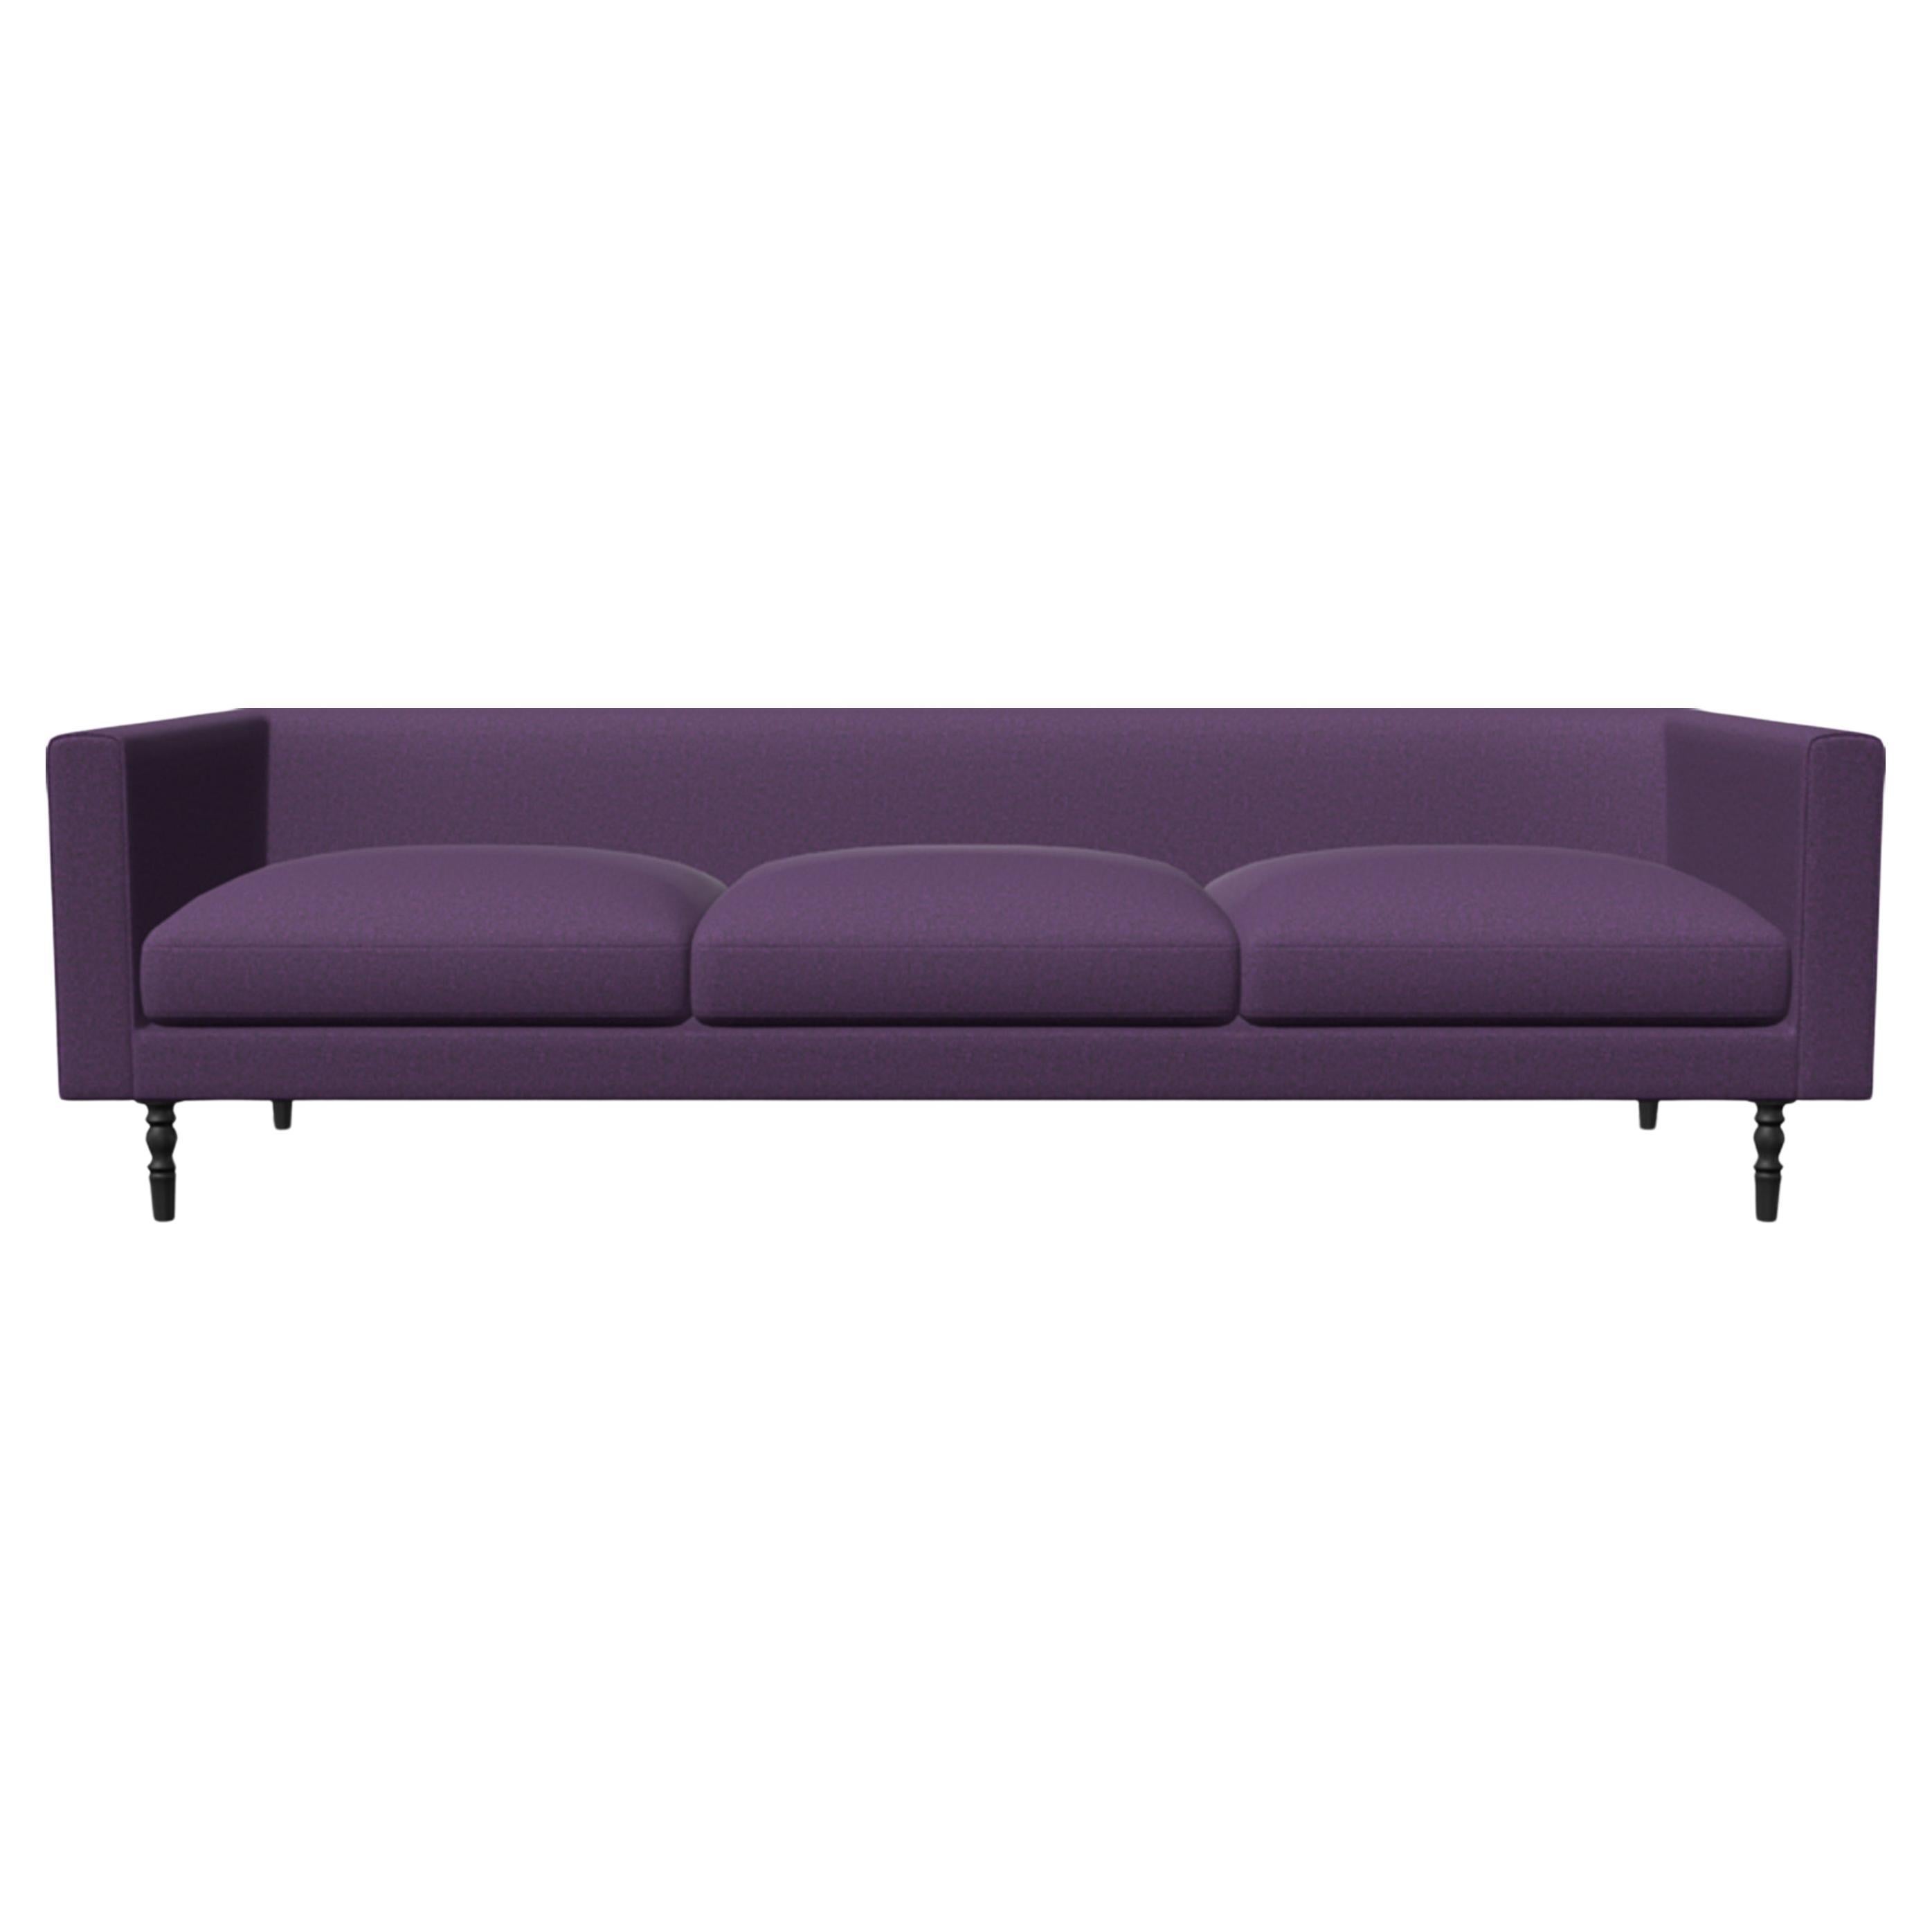 Moooi Boutique 3-Seat Sofa in Tonica 2, 672 Upholstery with Pawn Legs For Sale